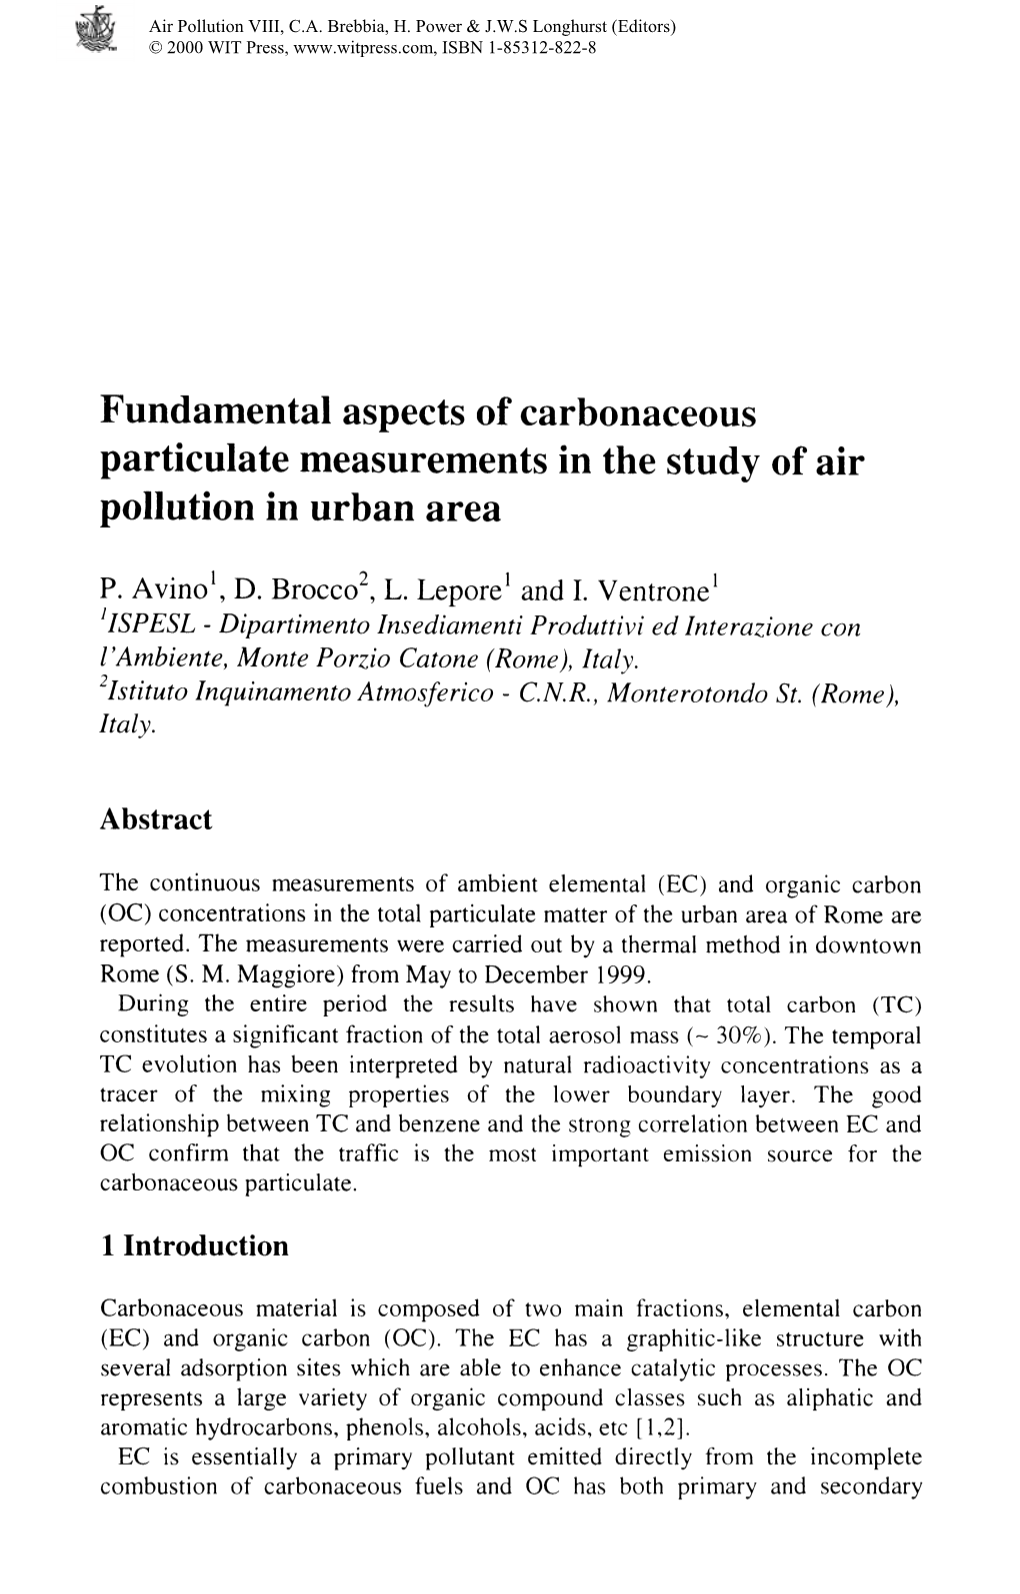 Fundamental Aspects of Carbonaceous Particulate Measurements in the Study of Air Pollution in Urban Area